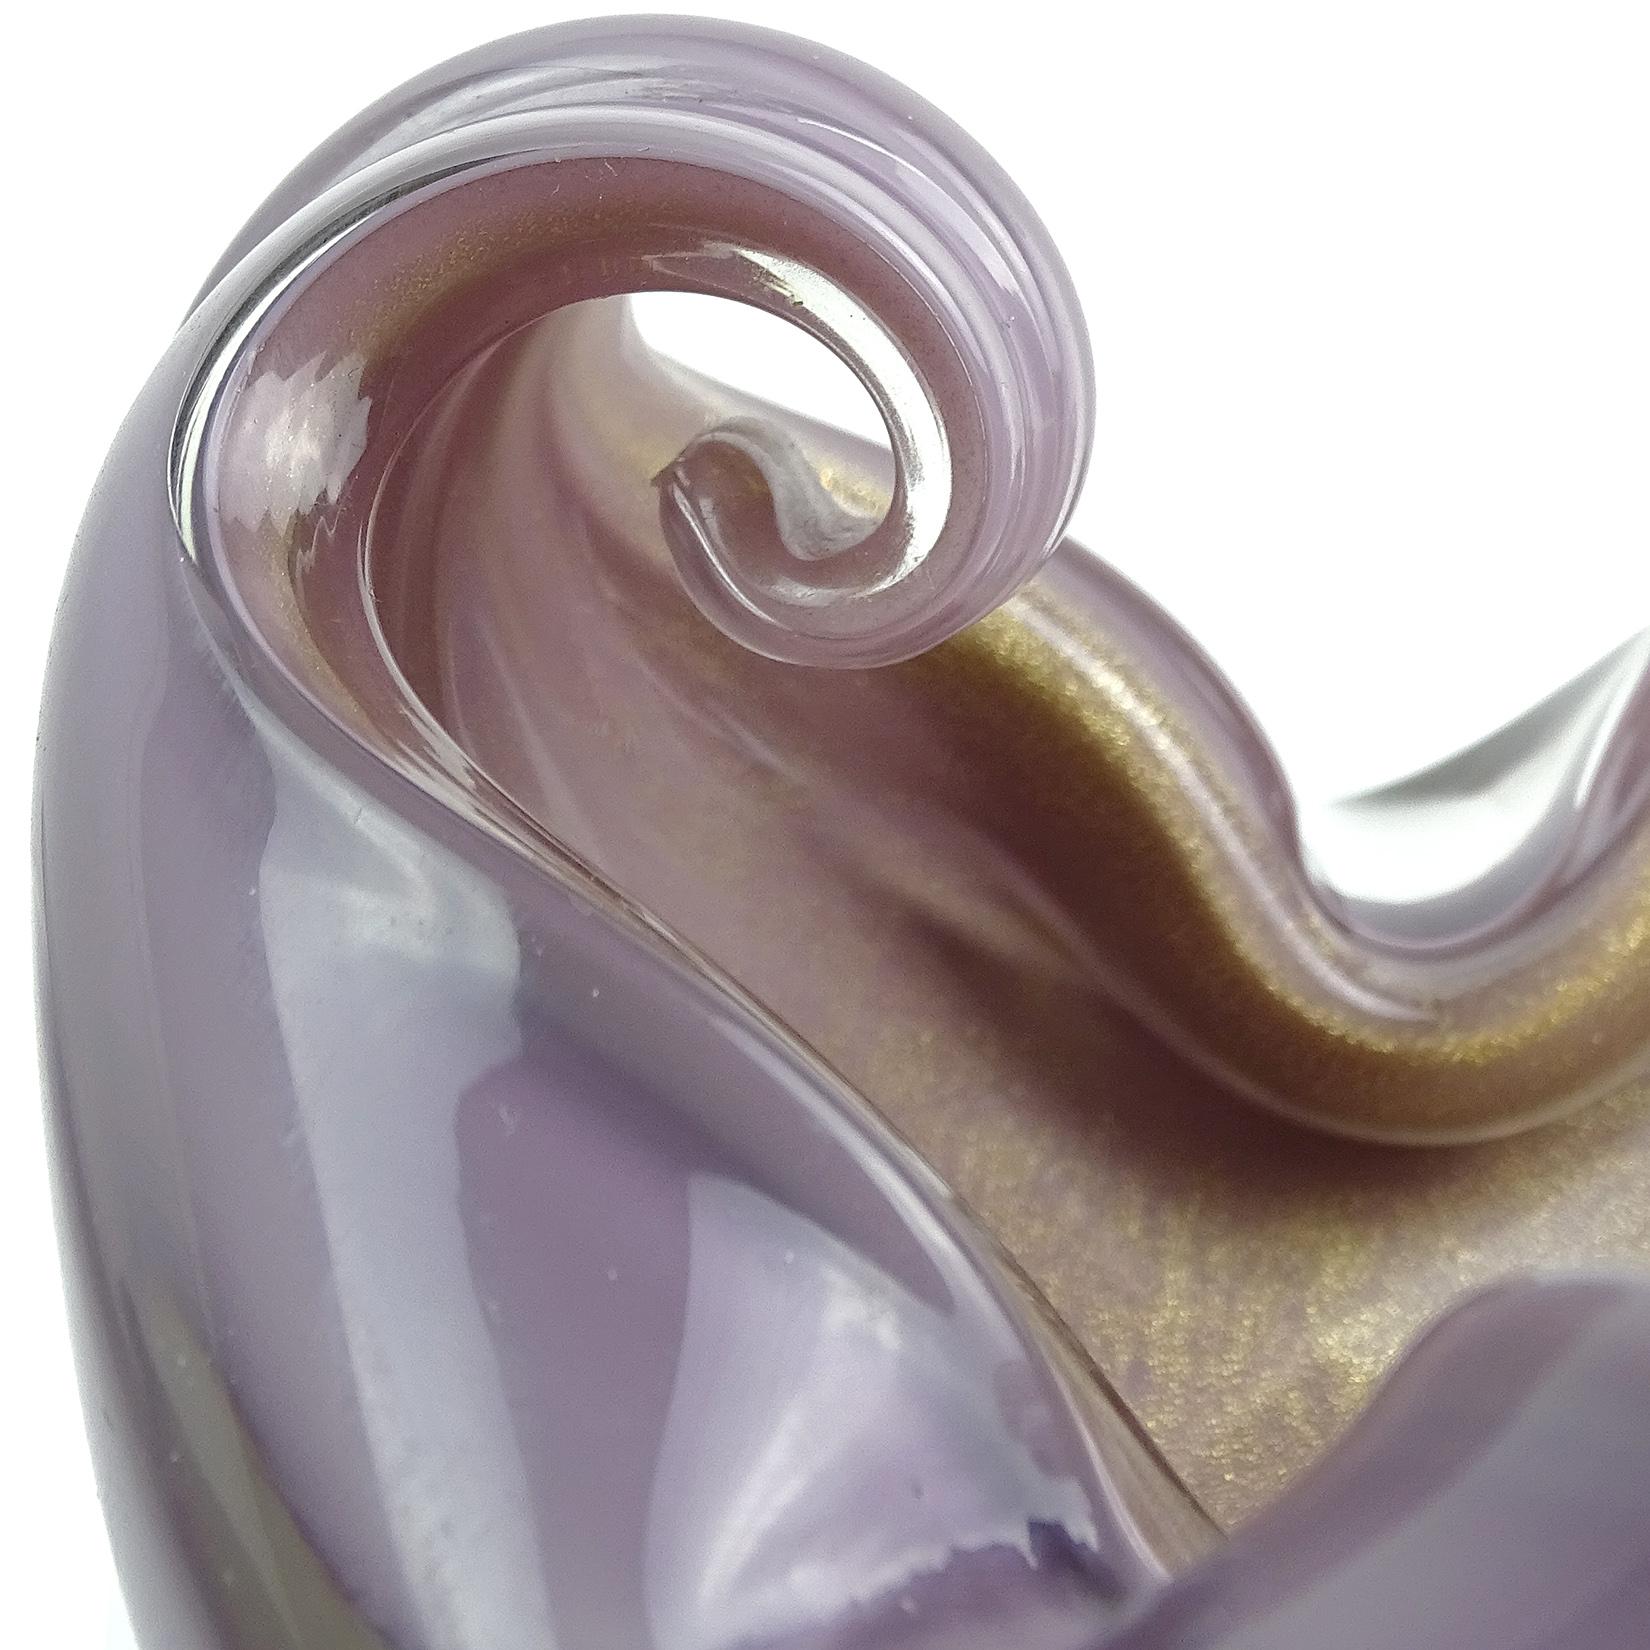 Beautiful vintage Murano hand blown purple and gold flecks Italian art glass curled top bowl or cigar ashtray. Documented to designer Alfredo Barbini, circa 1950-1960, and published in his Weil Ceramics and Glass catalog. Profusely covered in gold